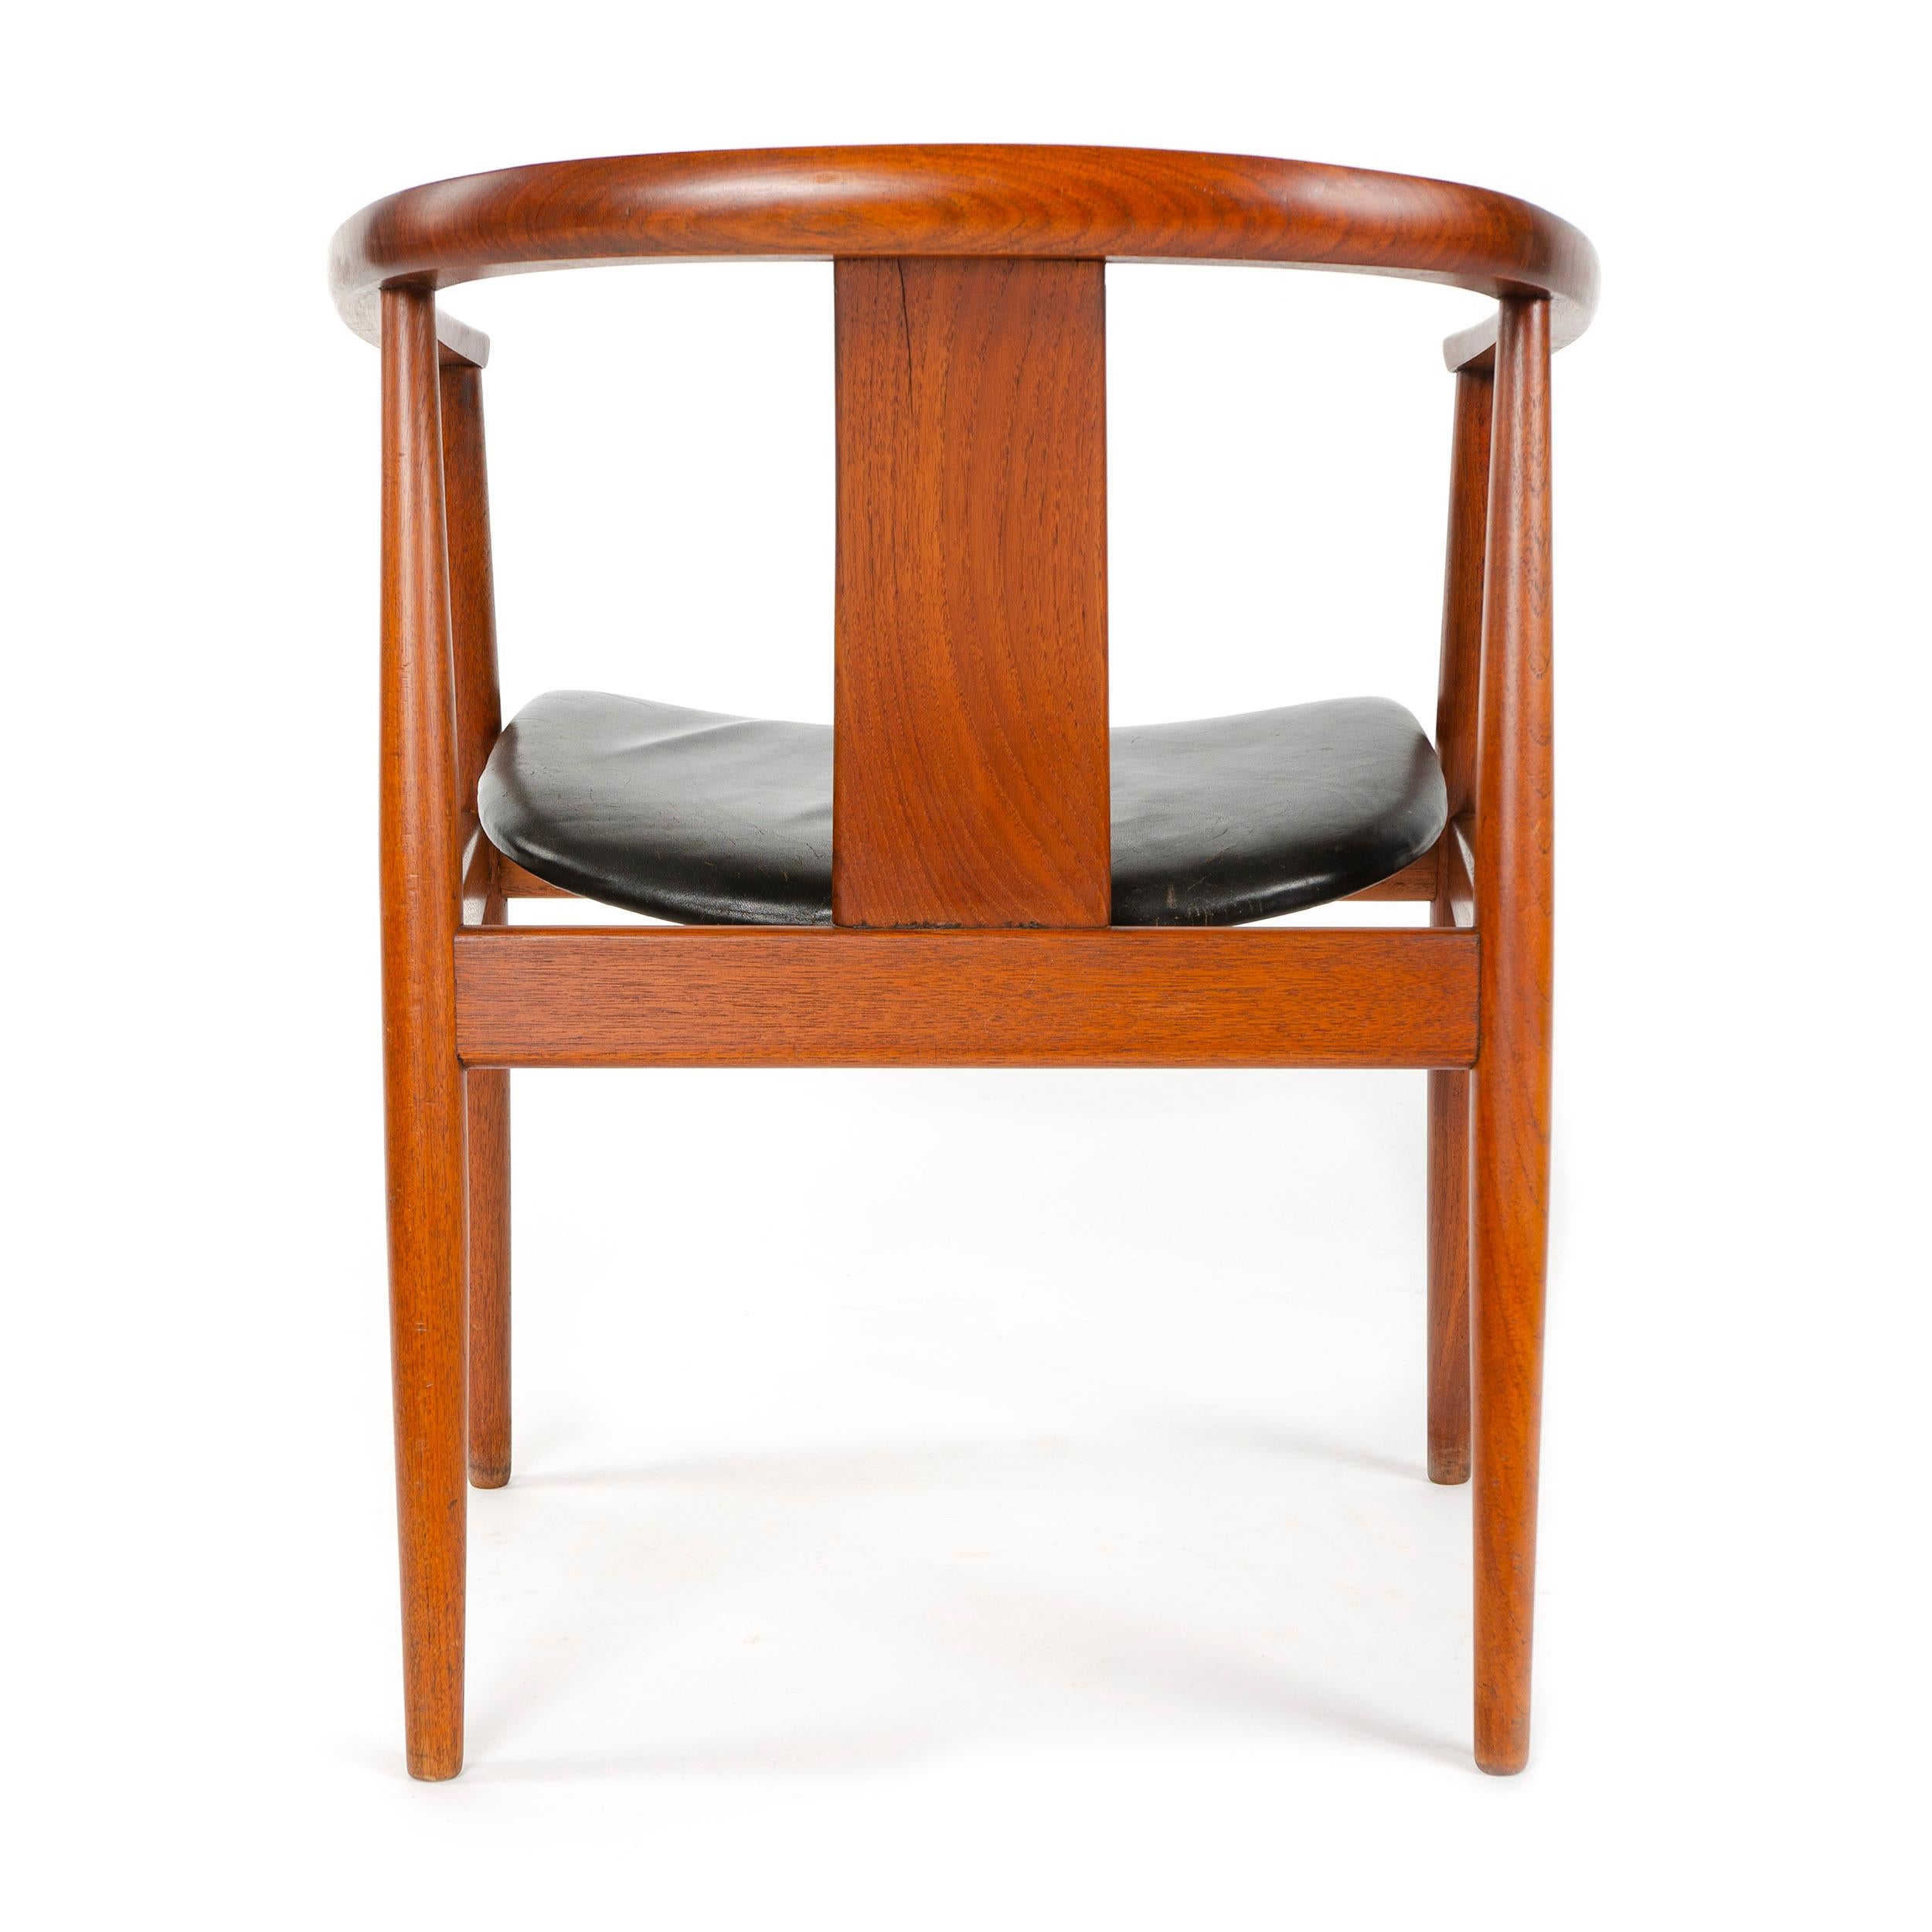 Teak Side Chair by Tove & Edvard Kindt-Larsen In Good Condition For Sale In Sagaponack, NY